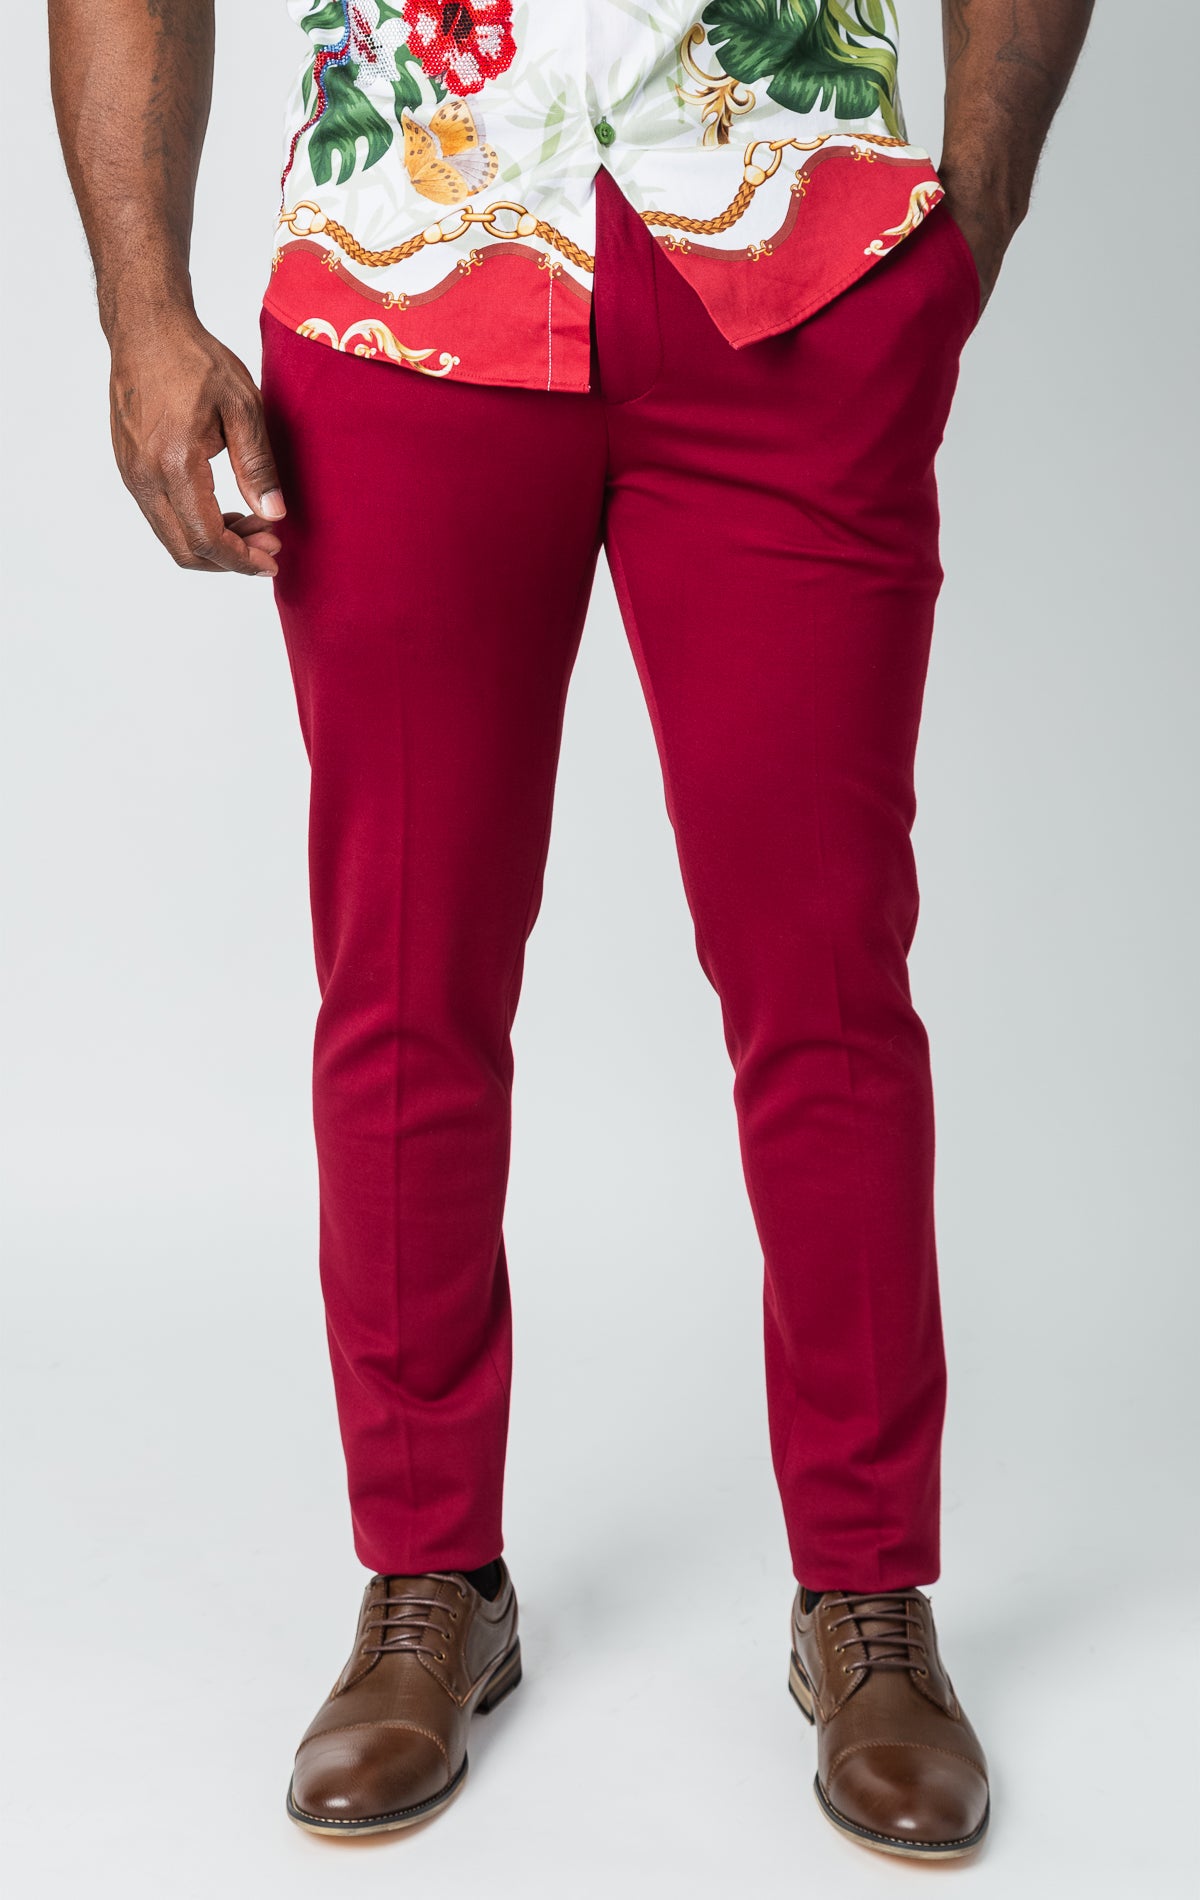 Red dress pants with elastic waistband technology